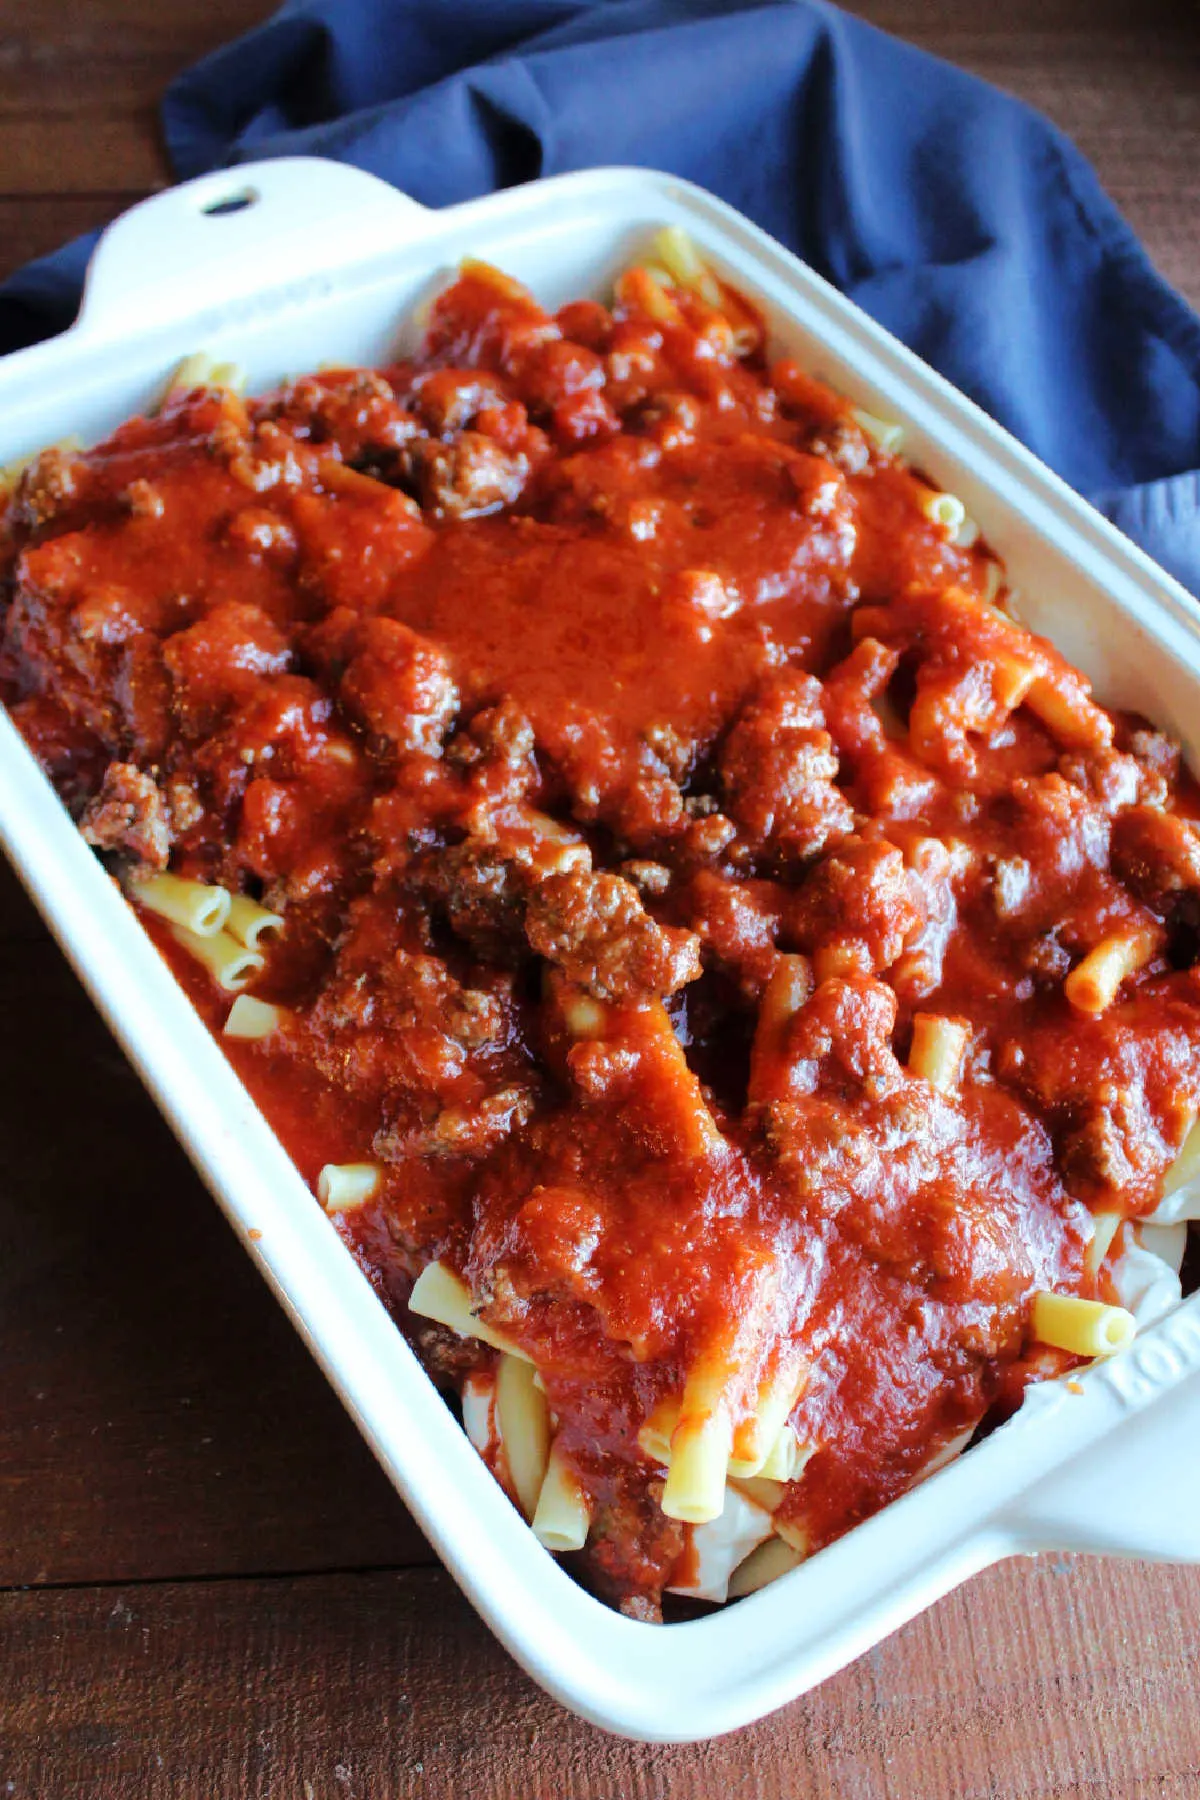 Another layer of pasta and meat sauce on top of cheese and sour cream layer in casserole dish.